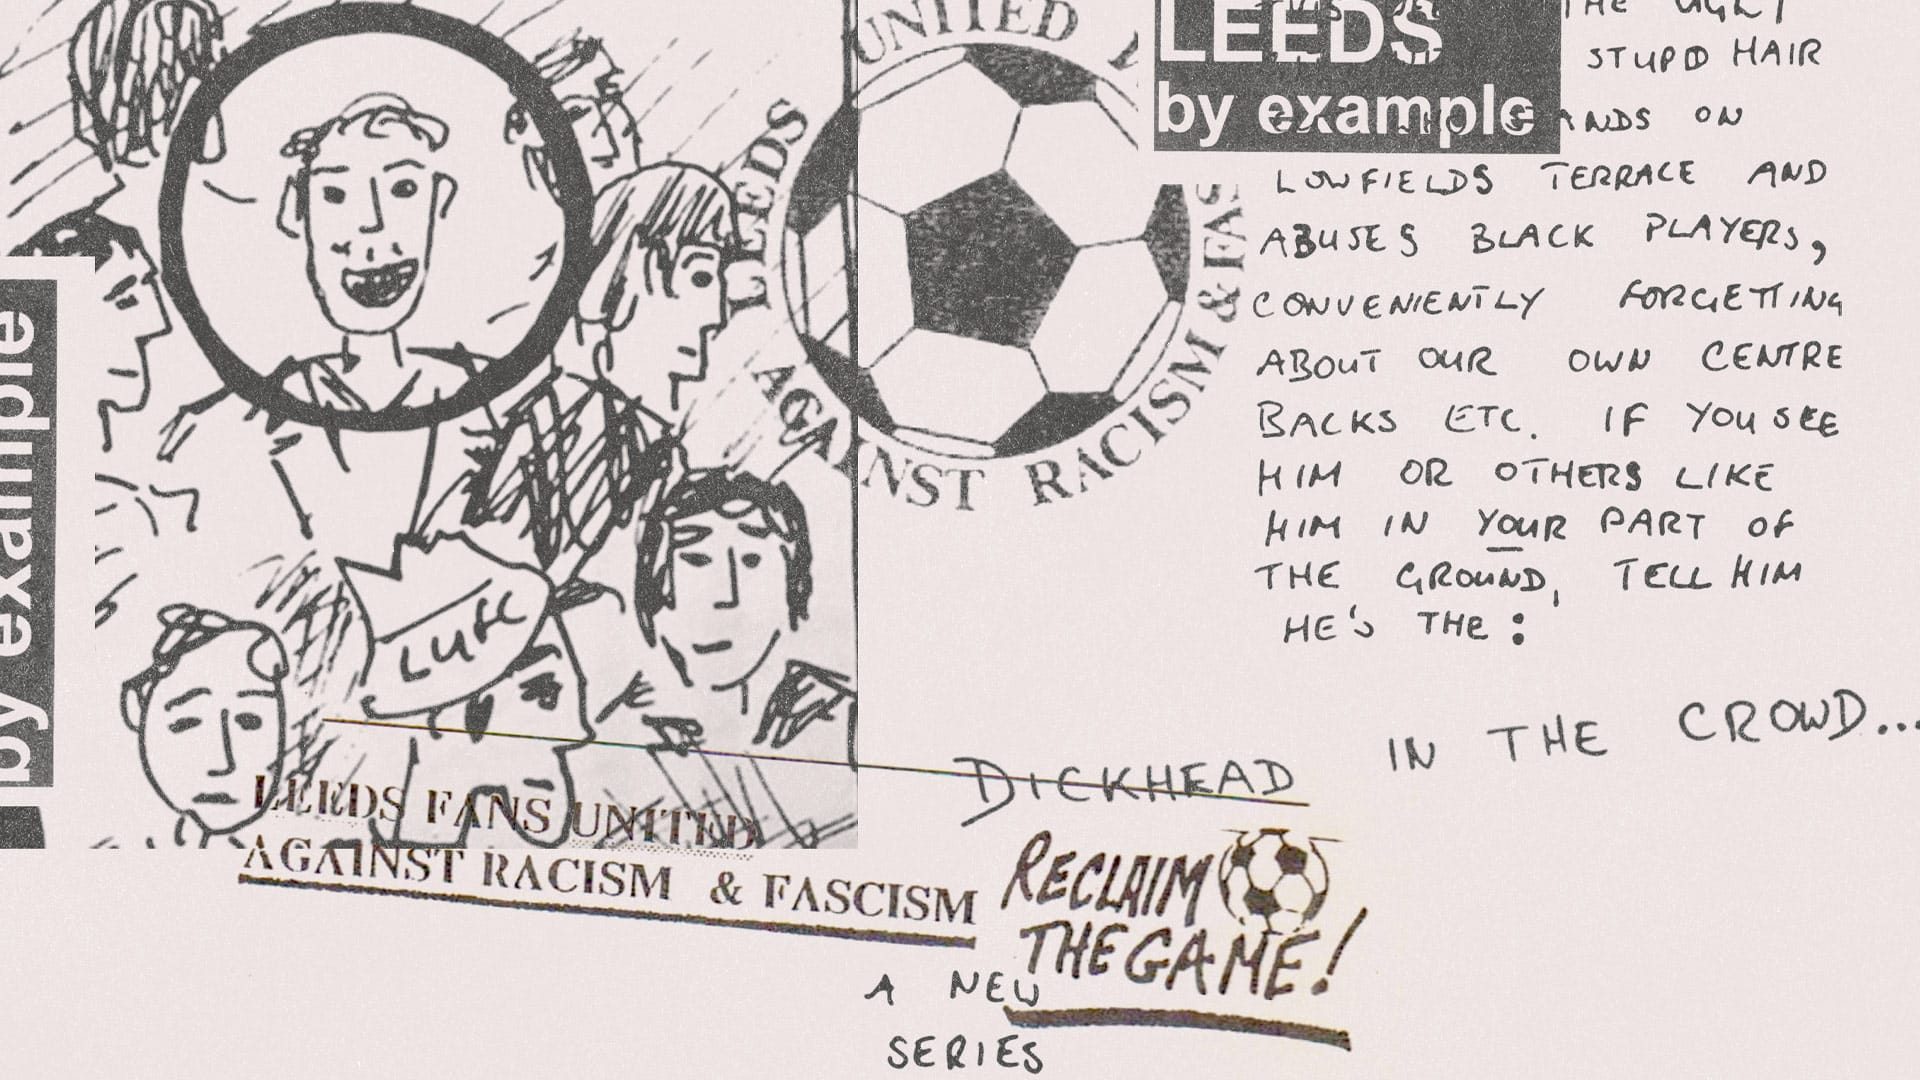 A collage of cartoons from the Leeds United Fans Against Racism and Fascism fanzine Marching Altogether, including a drawing of fans pointing out the 'dickhead in the crowd'